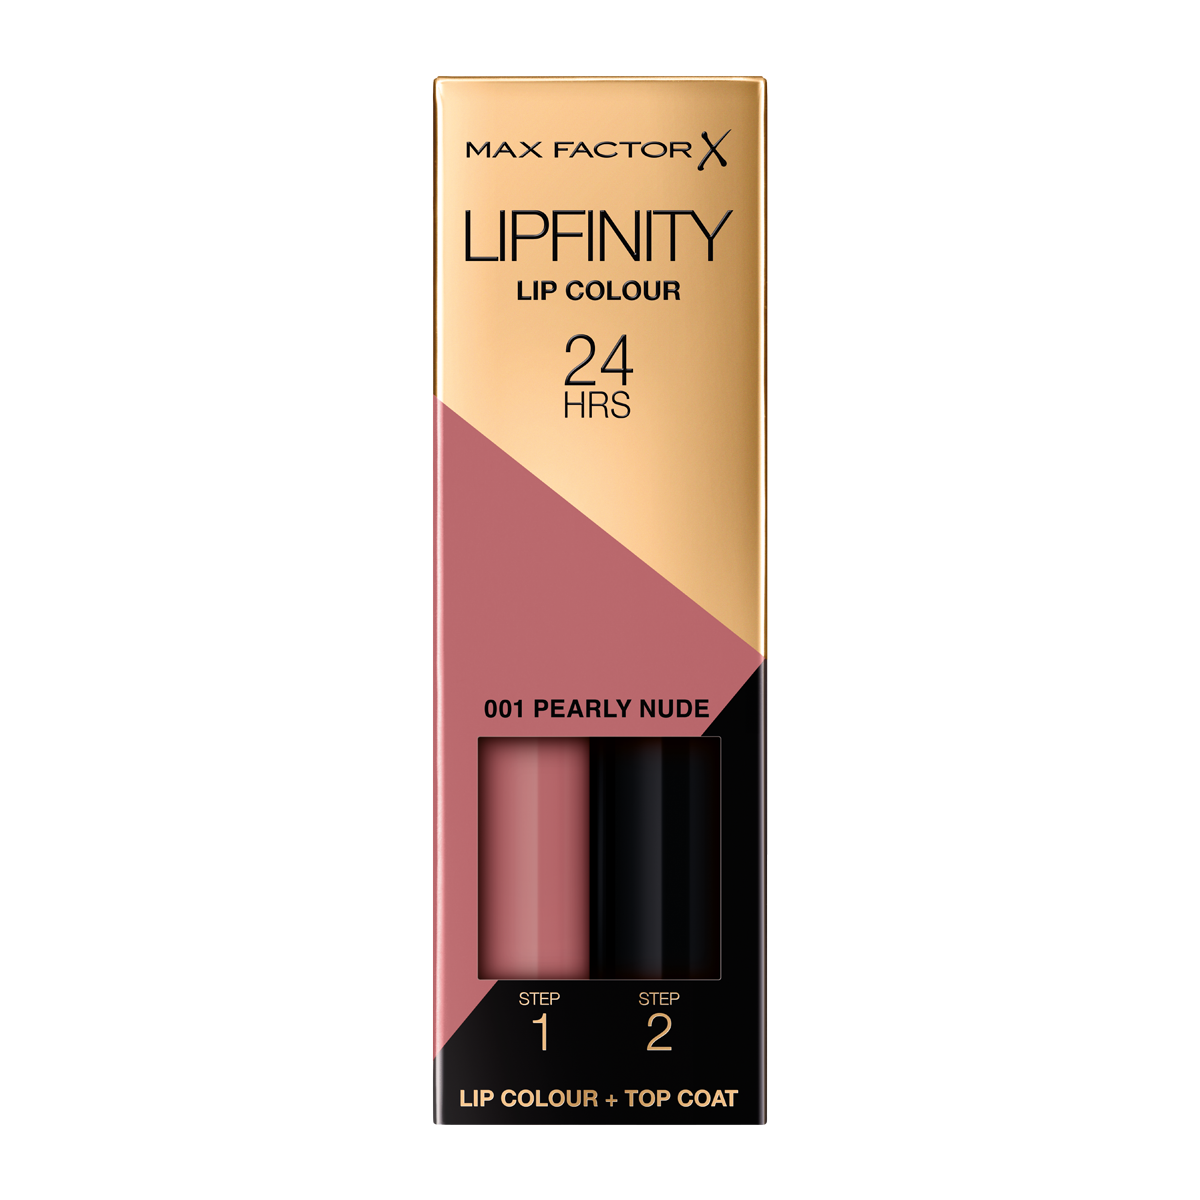 MaxFactor_FY20H2_Lipfinity-Lip-Colour-Two-Step_Packshot_Closed_001-Pearly-Nude_CMYK_LowRes.png